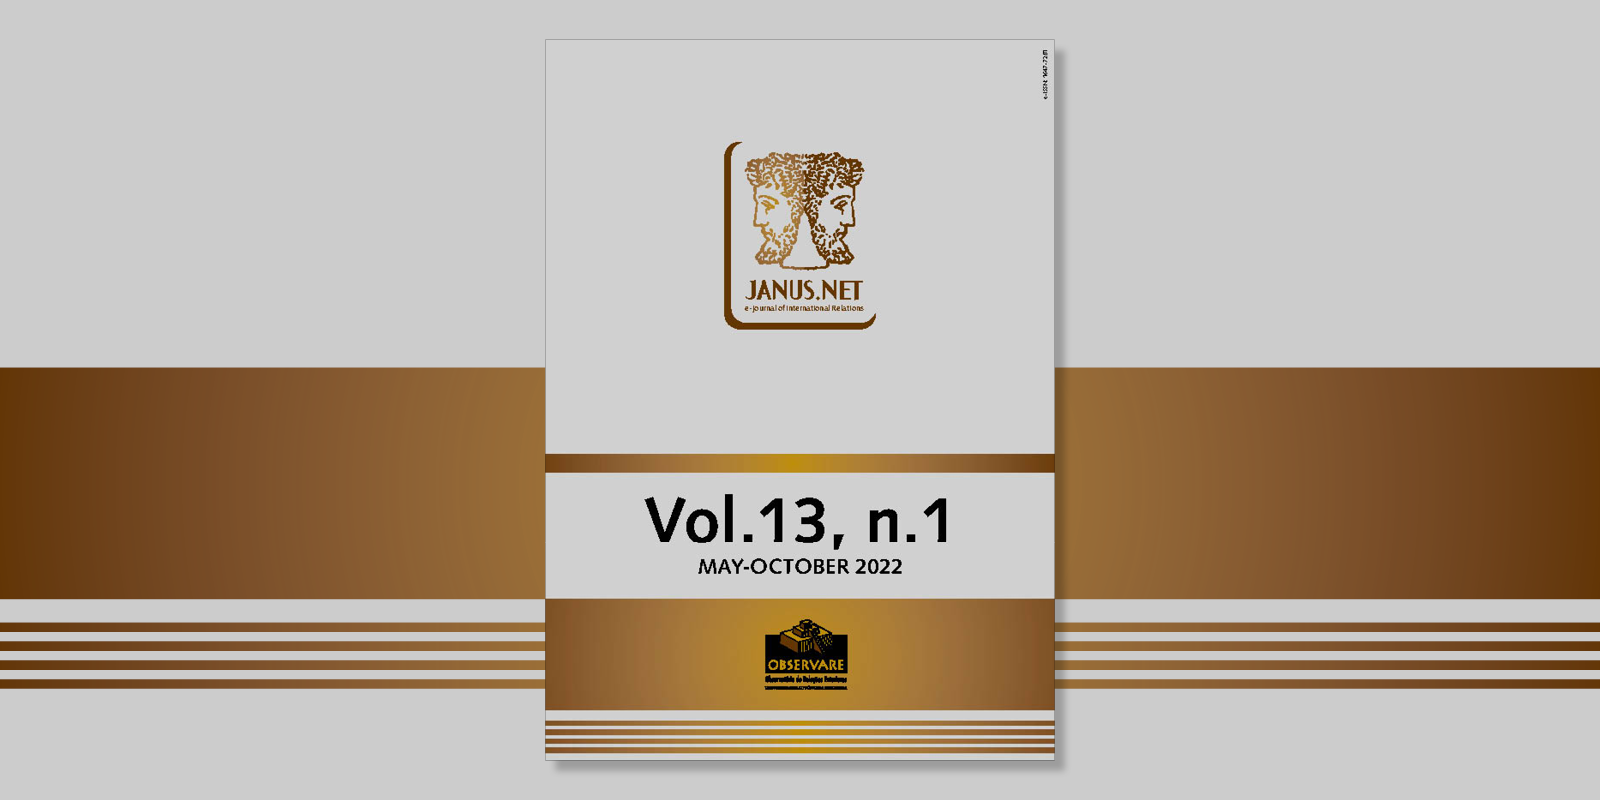 NEW ISSUE – JANUS NET, e-journal of international relations – Vol.13, n.1 (May-October 2022)